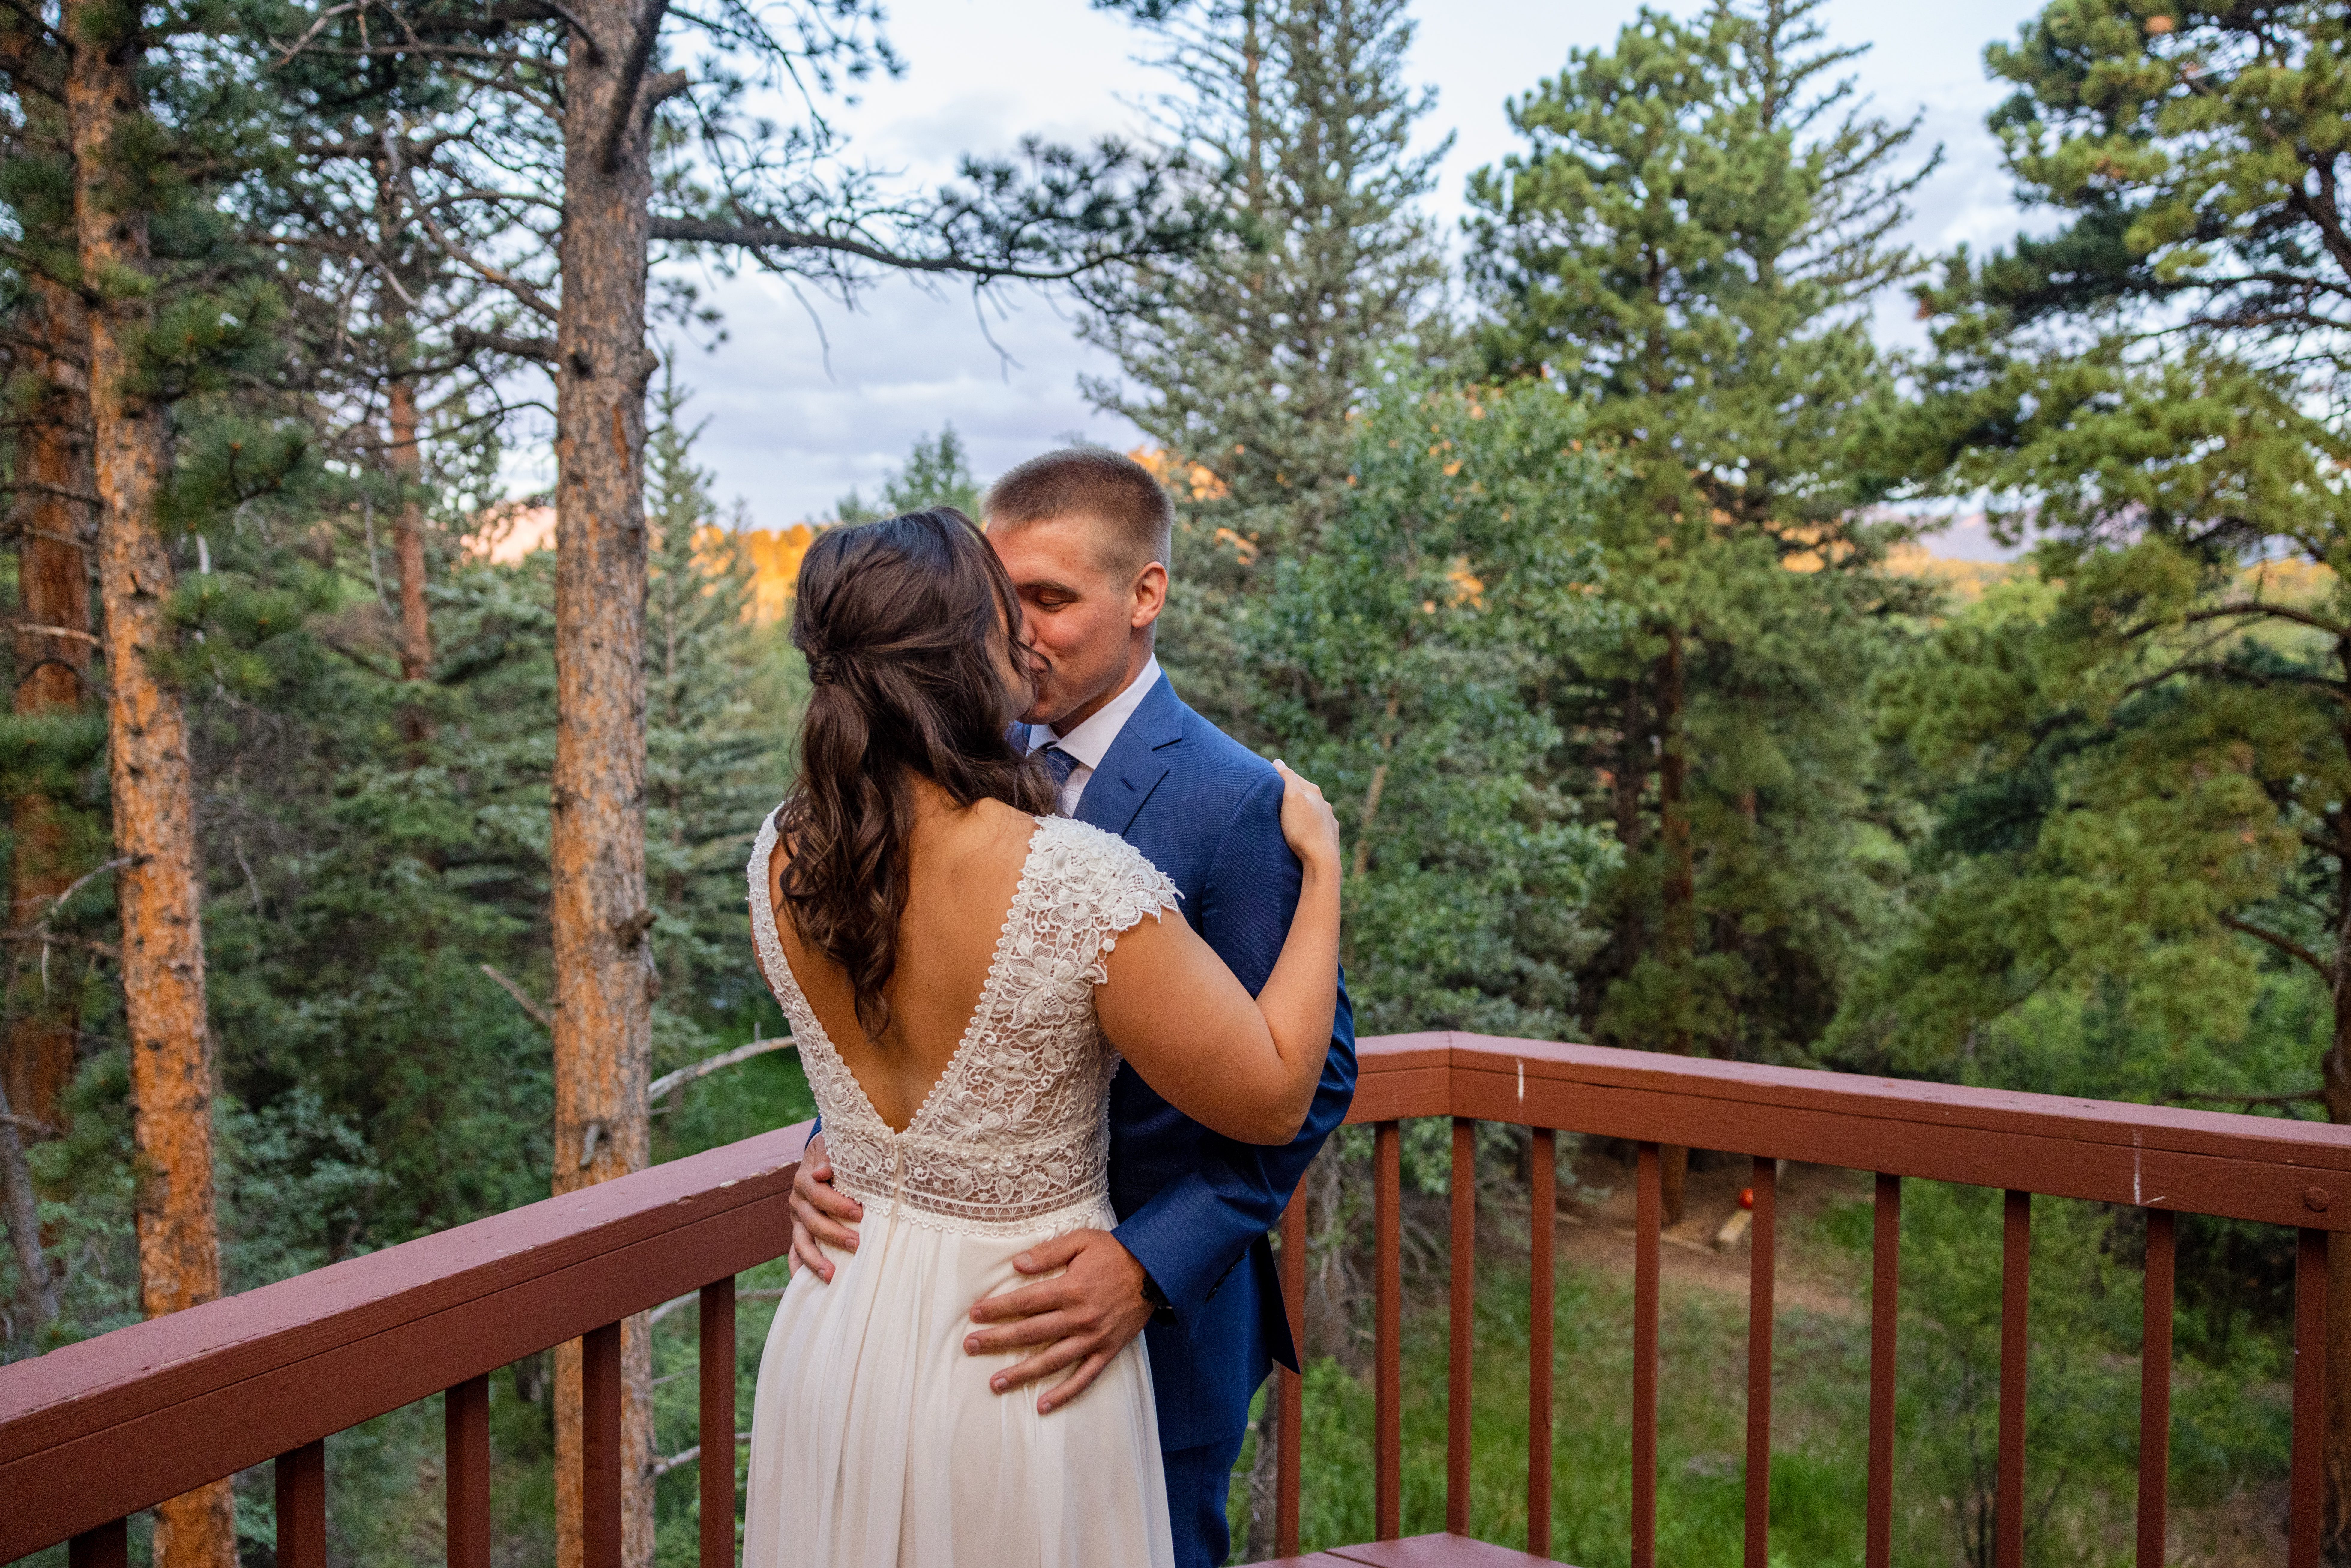 The groom kisses his bride after their first look at Romantic RiverSong Inn in Estes Park on their wedding day 